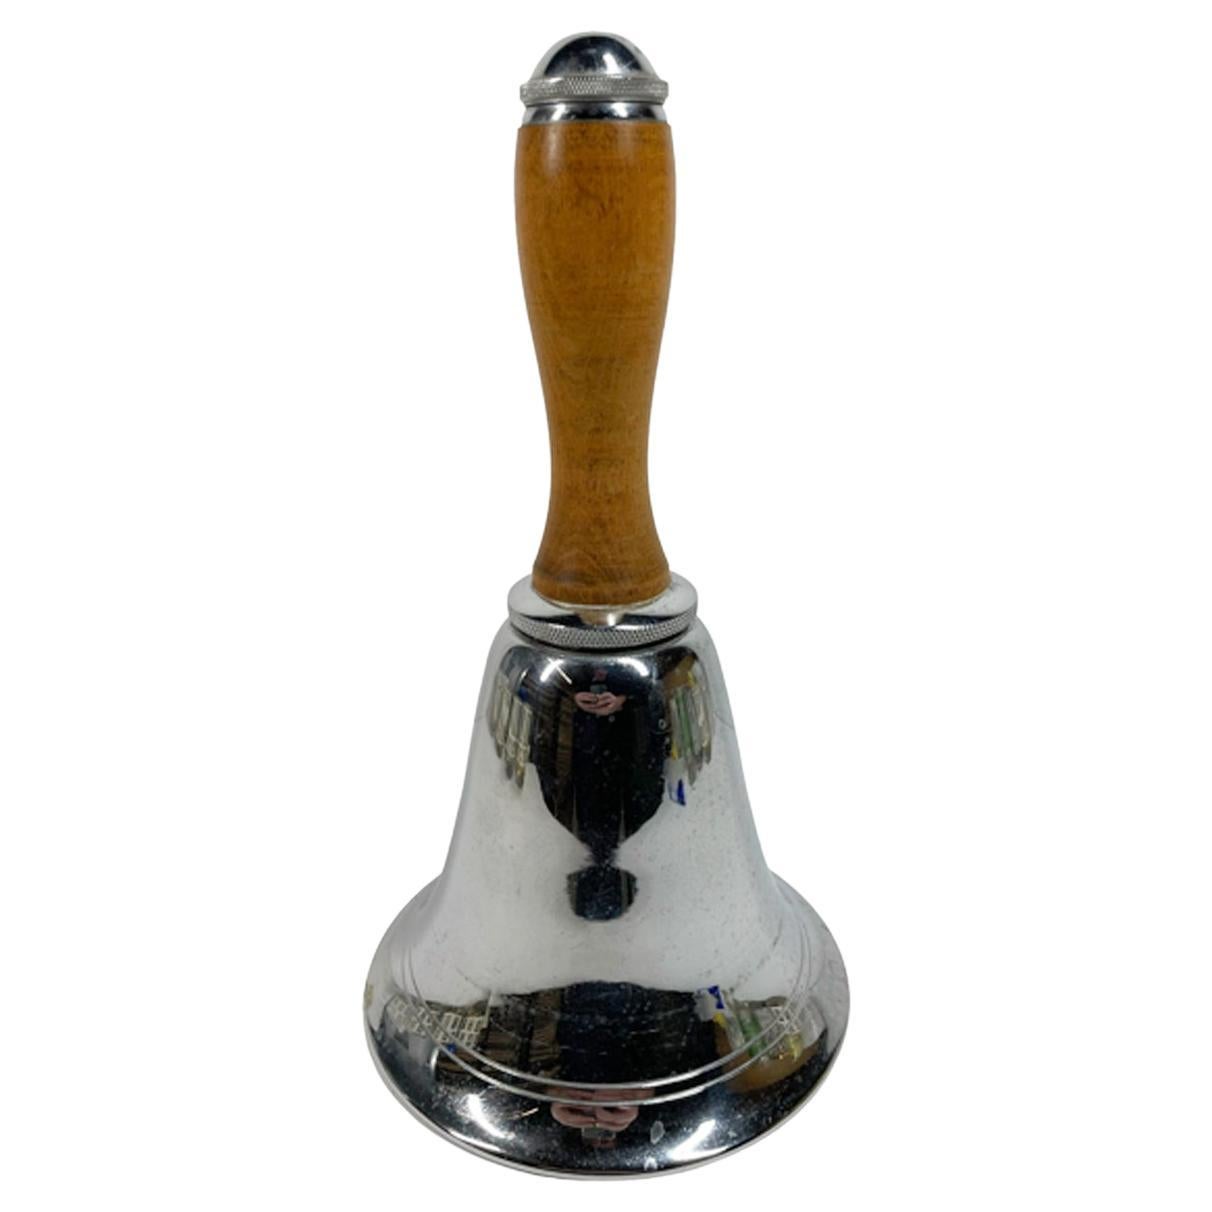 Mid 20th Century Chrome and Wood "Town Crier" Bell-Form Cocktail Shaker